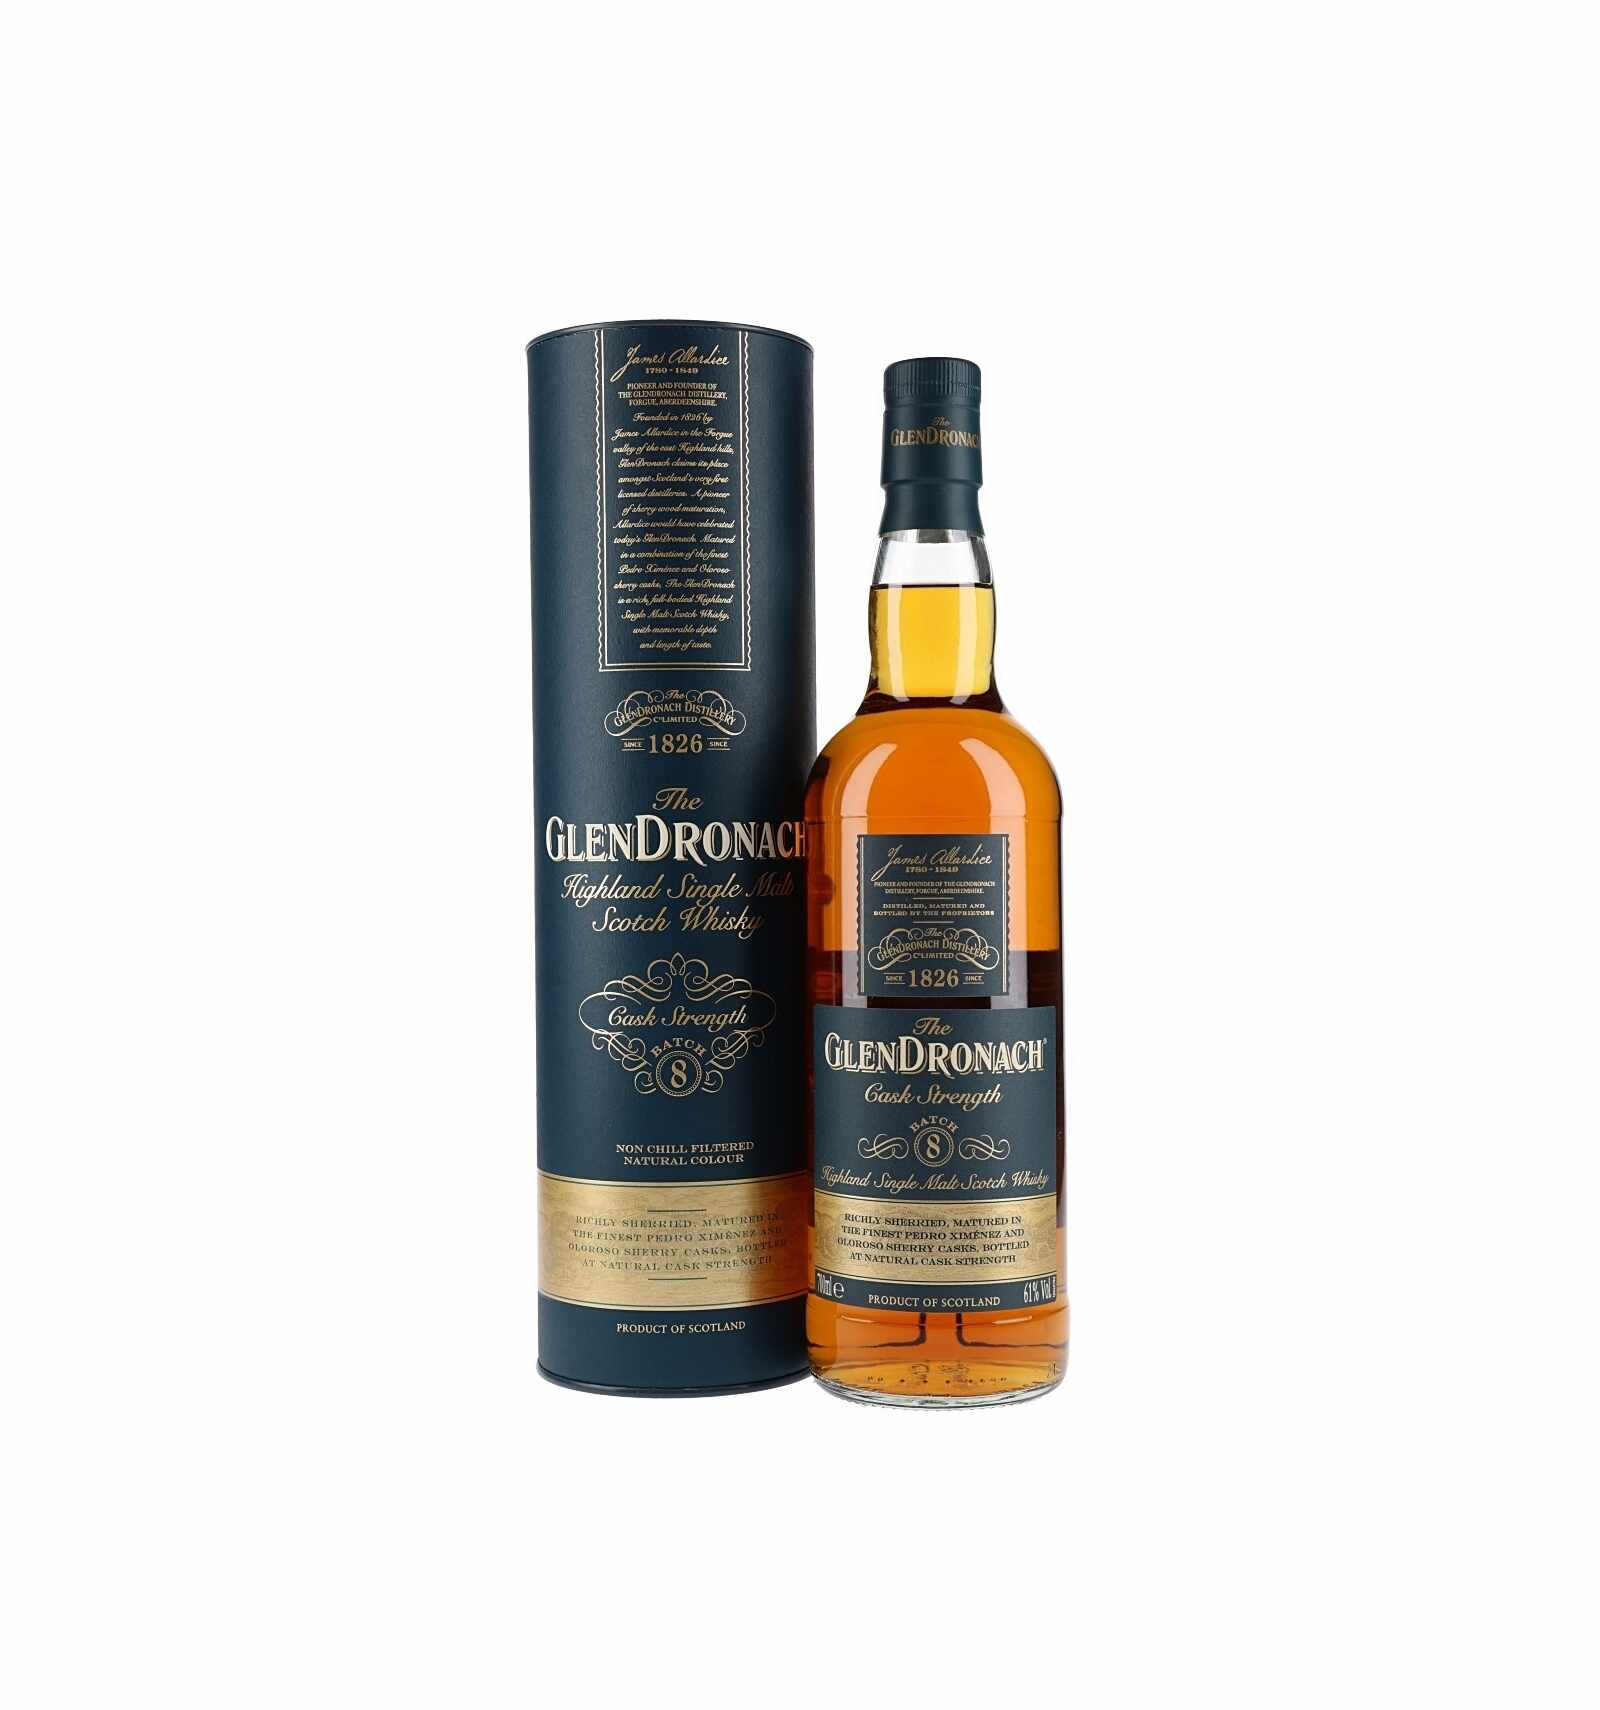 Whisky Glendronach Cask Strenght, 61% alc., 0.7L, Scotia